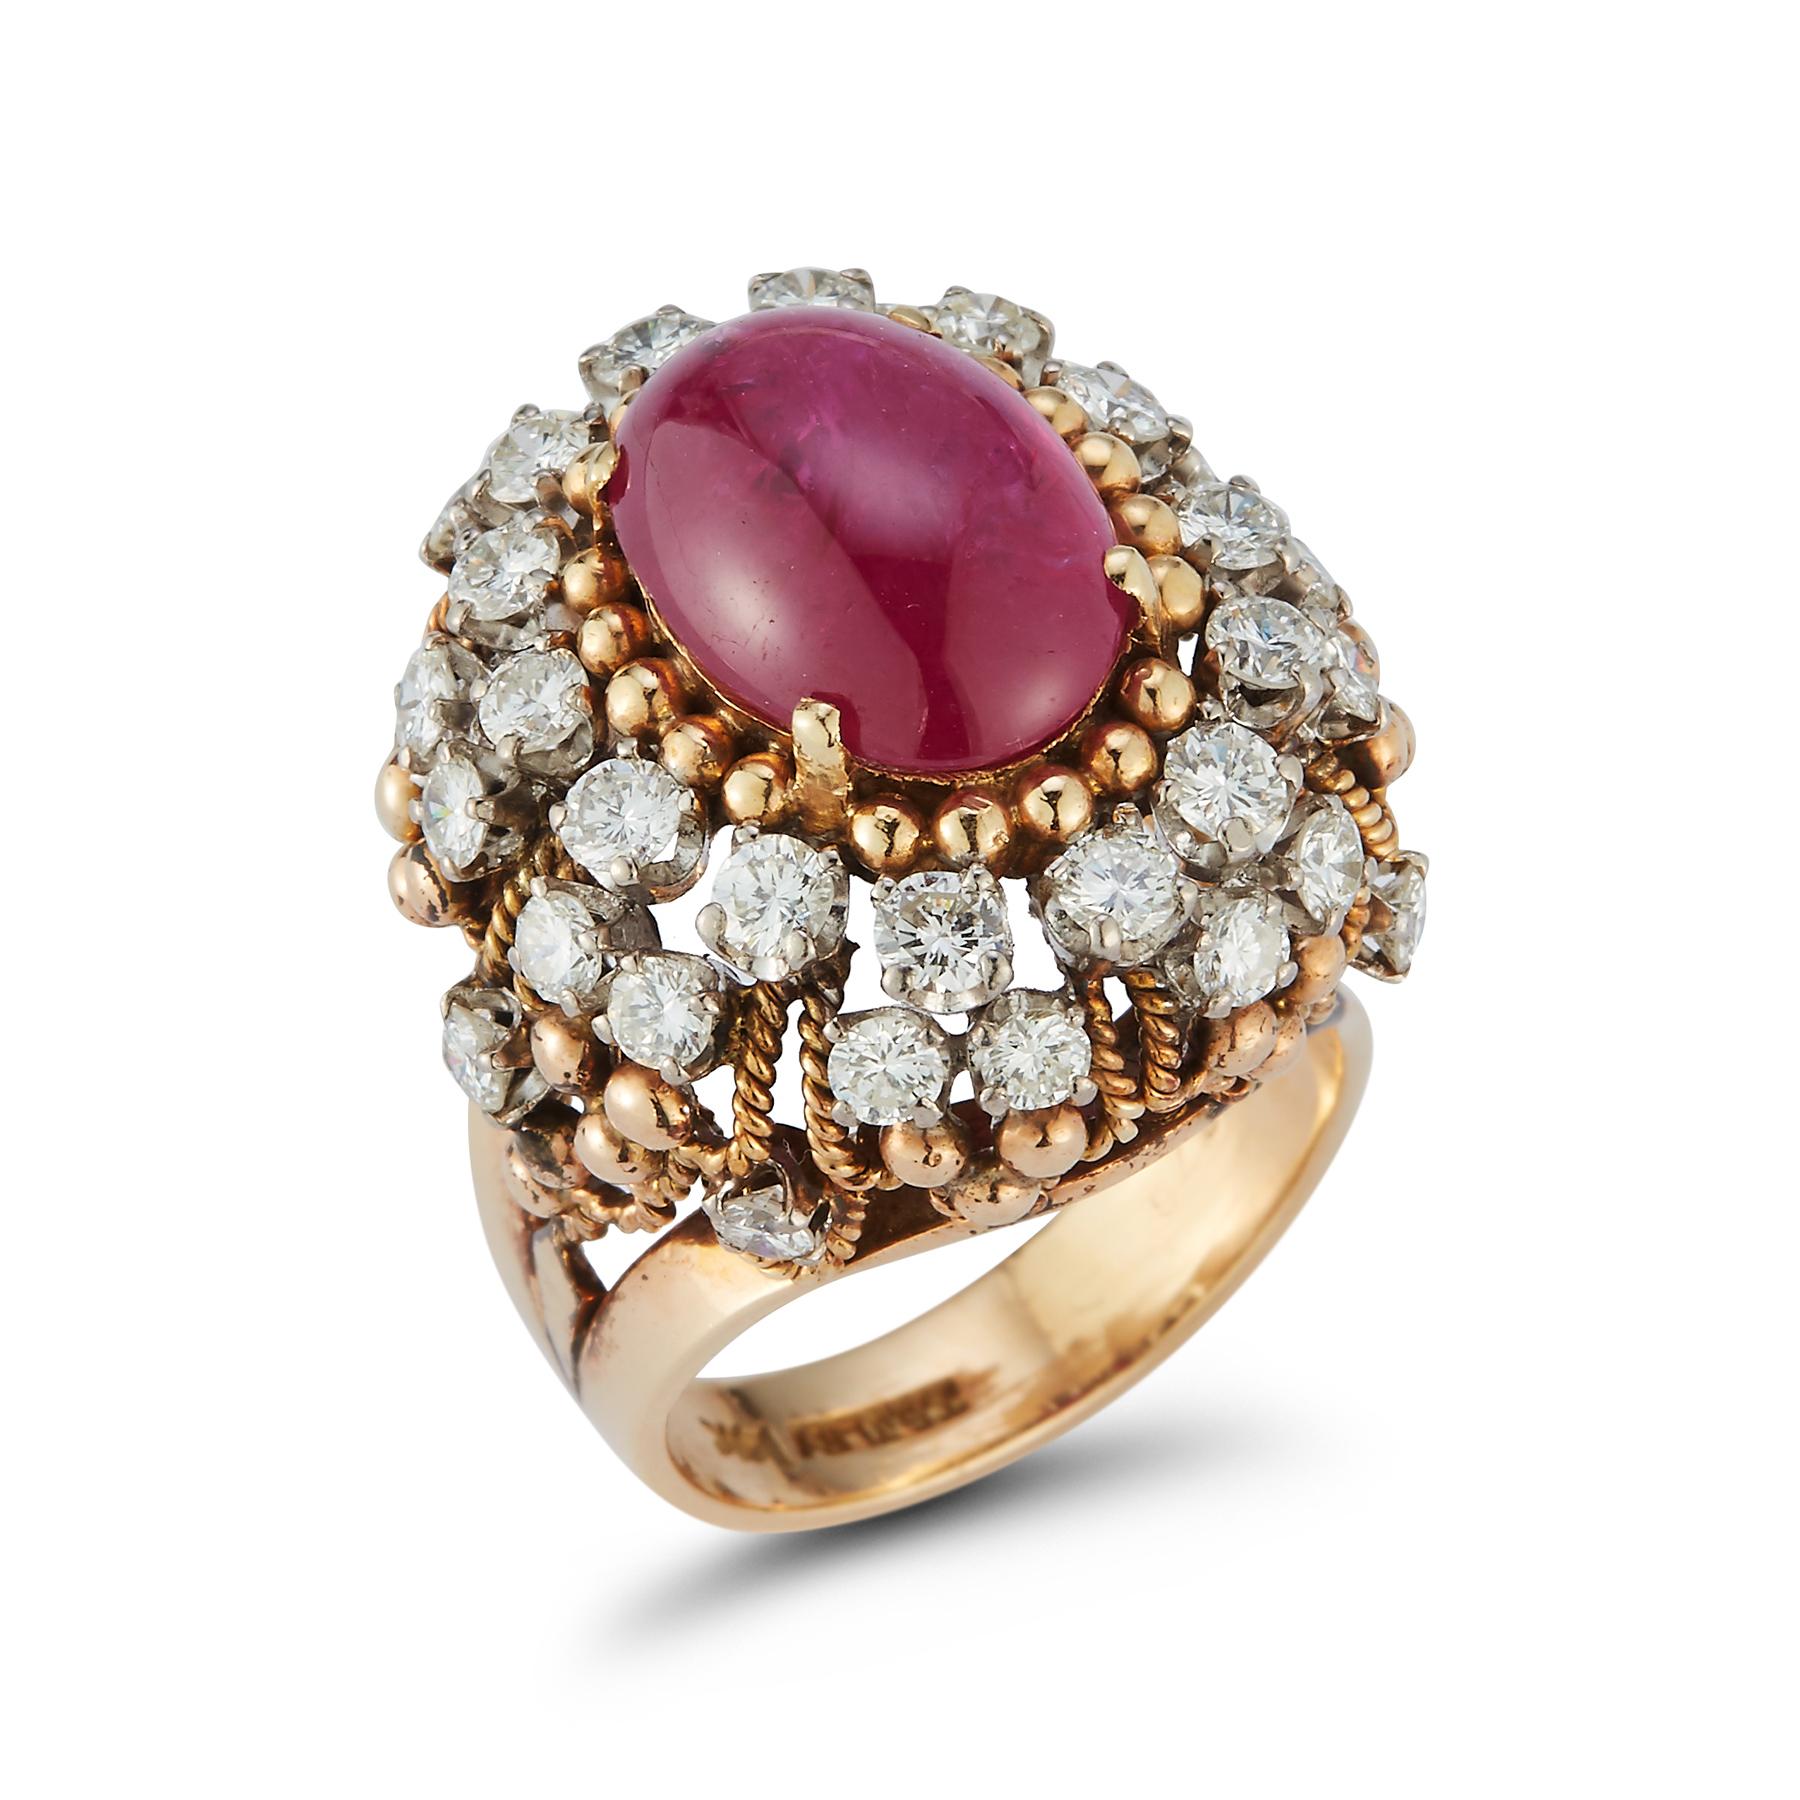 Cabochon Ruby & Diamond Cocktail Ring 1 cabochon ruby surrounded by  36 round diamonds in gold wire work

unknown maker's serial number in the shank

Ring Size: 7 

Re sizable free of charge 

Gold Type: 14K Yellow Gold 